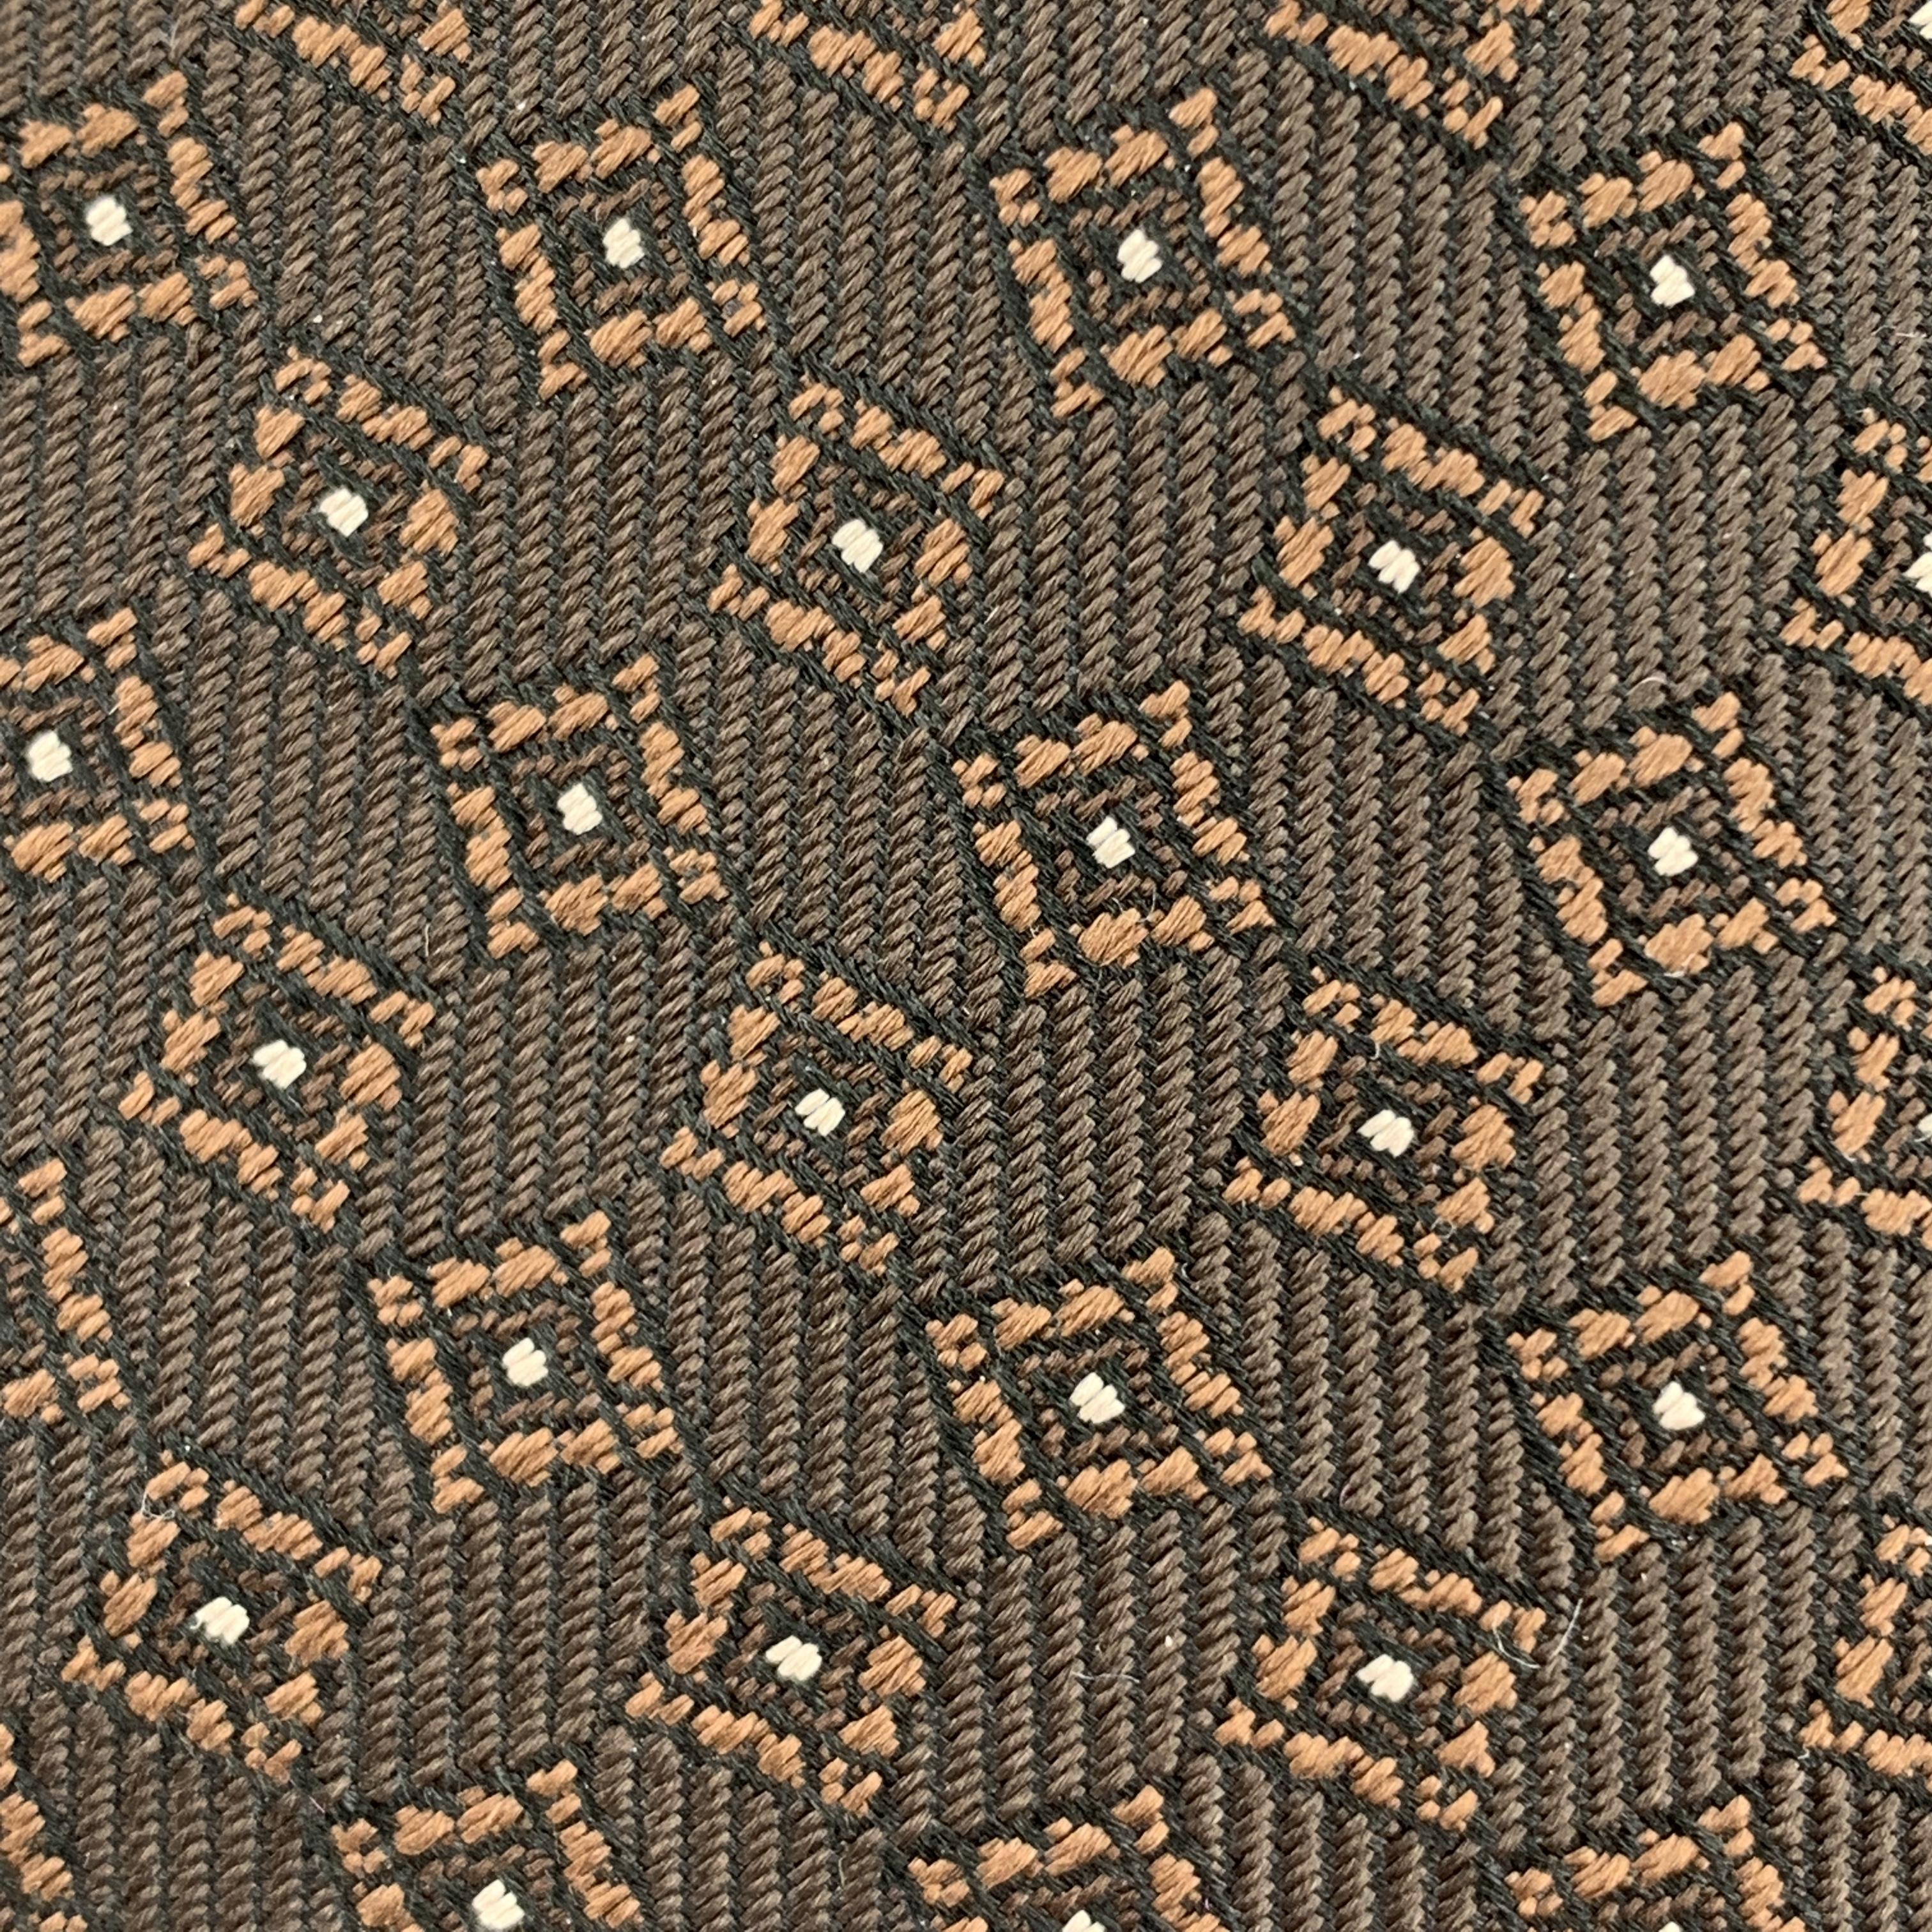 BURBERRY PRORSUM skinny tie comes in brown silk twill with all over copper textured square print. Made in Italy.

Excellent Pre-Owned Condition.

Width: 2 in.